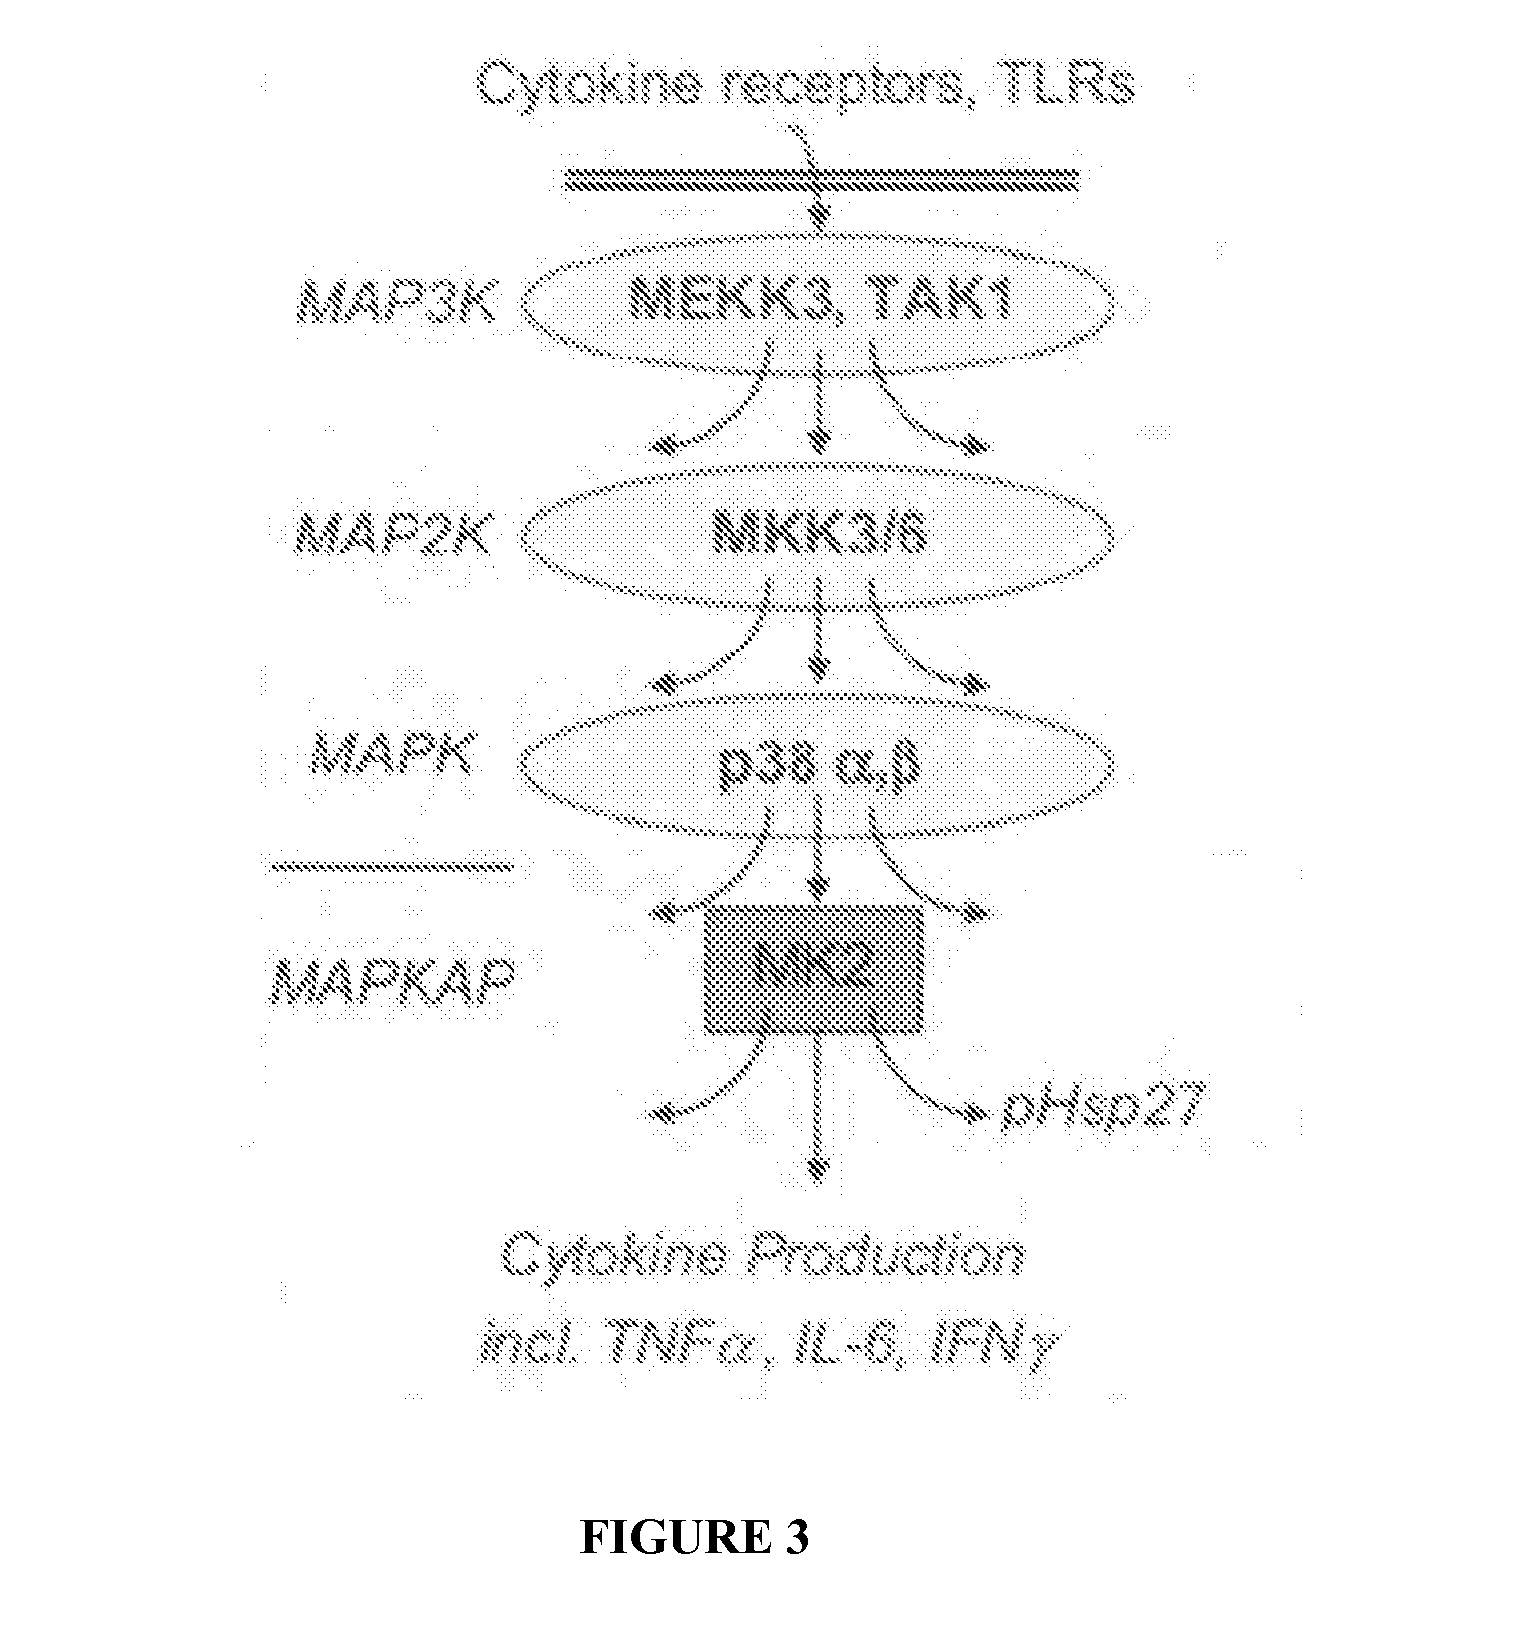 Compositions and Methods for Treating Cutaneous Scarring